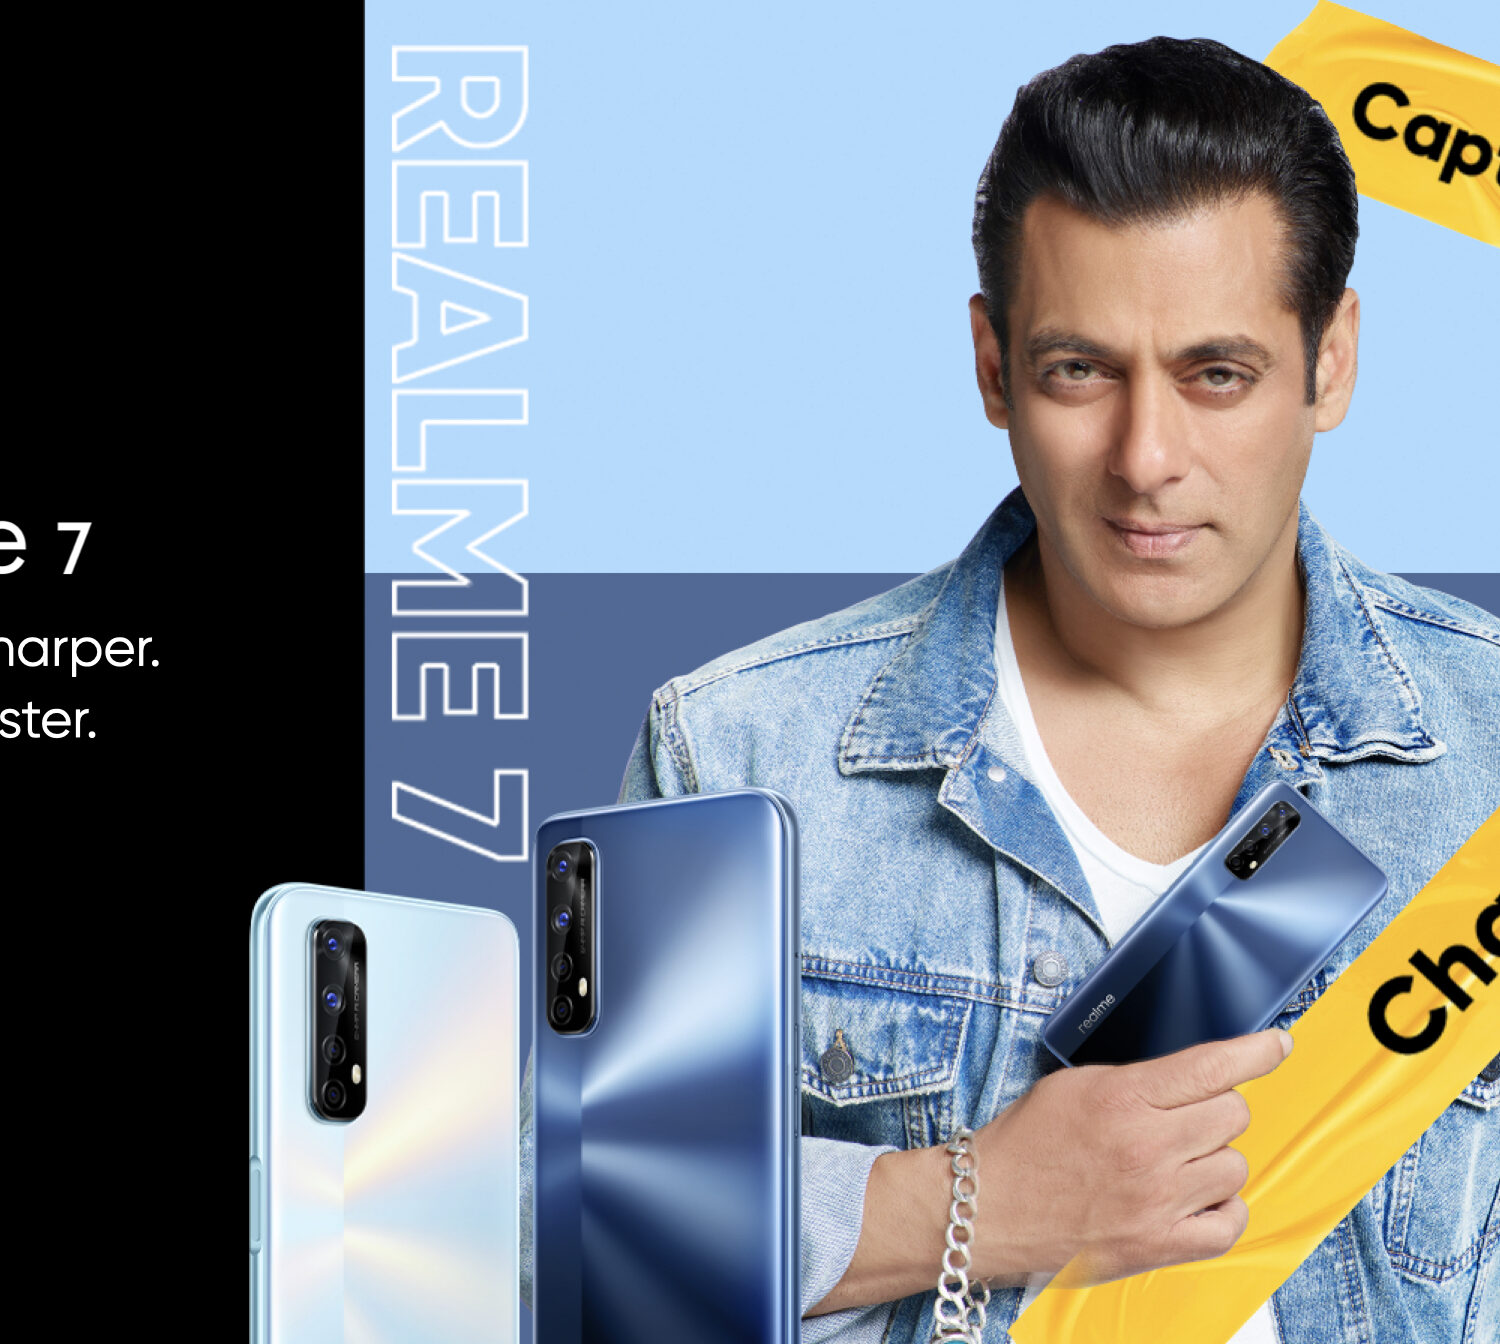 Realme 7 with 6.5-inch Full HD+ 90Hz IPS LCD display, Mediatek Helio G95 SoC and 64MP Quad Camera with Sony IMX682 sensor launched in India starting from ₹ 14,999